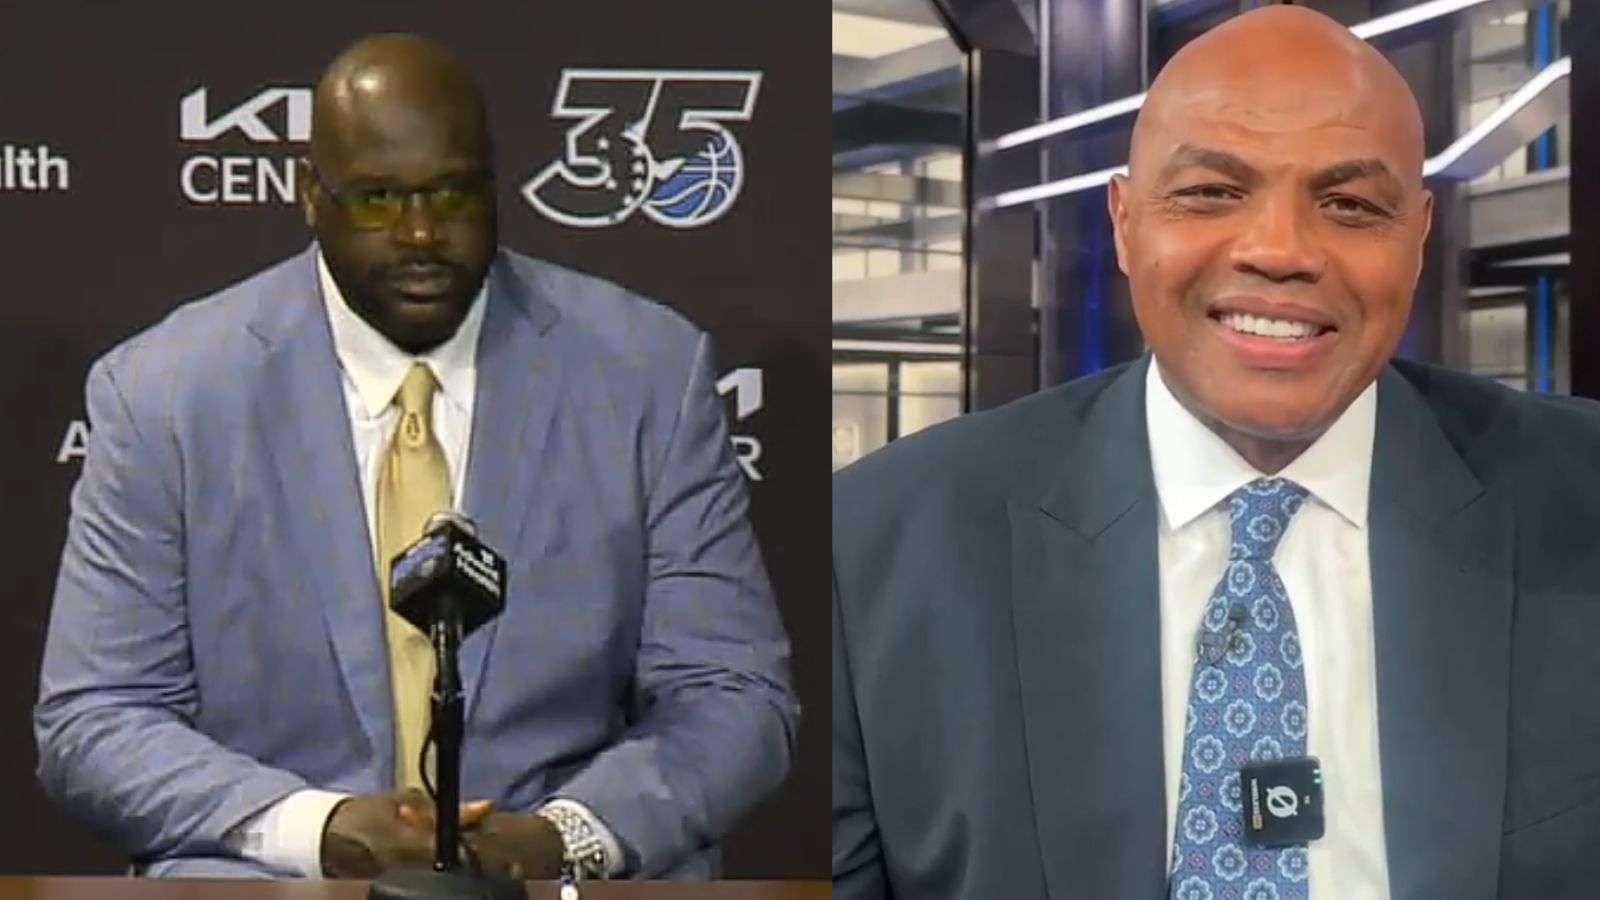 Shaquille O'Neal during his Magic jersey retirement press conferece (left) and Charles Barkley on the set of Inside the NBA (right).